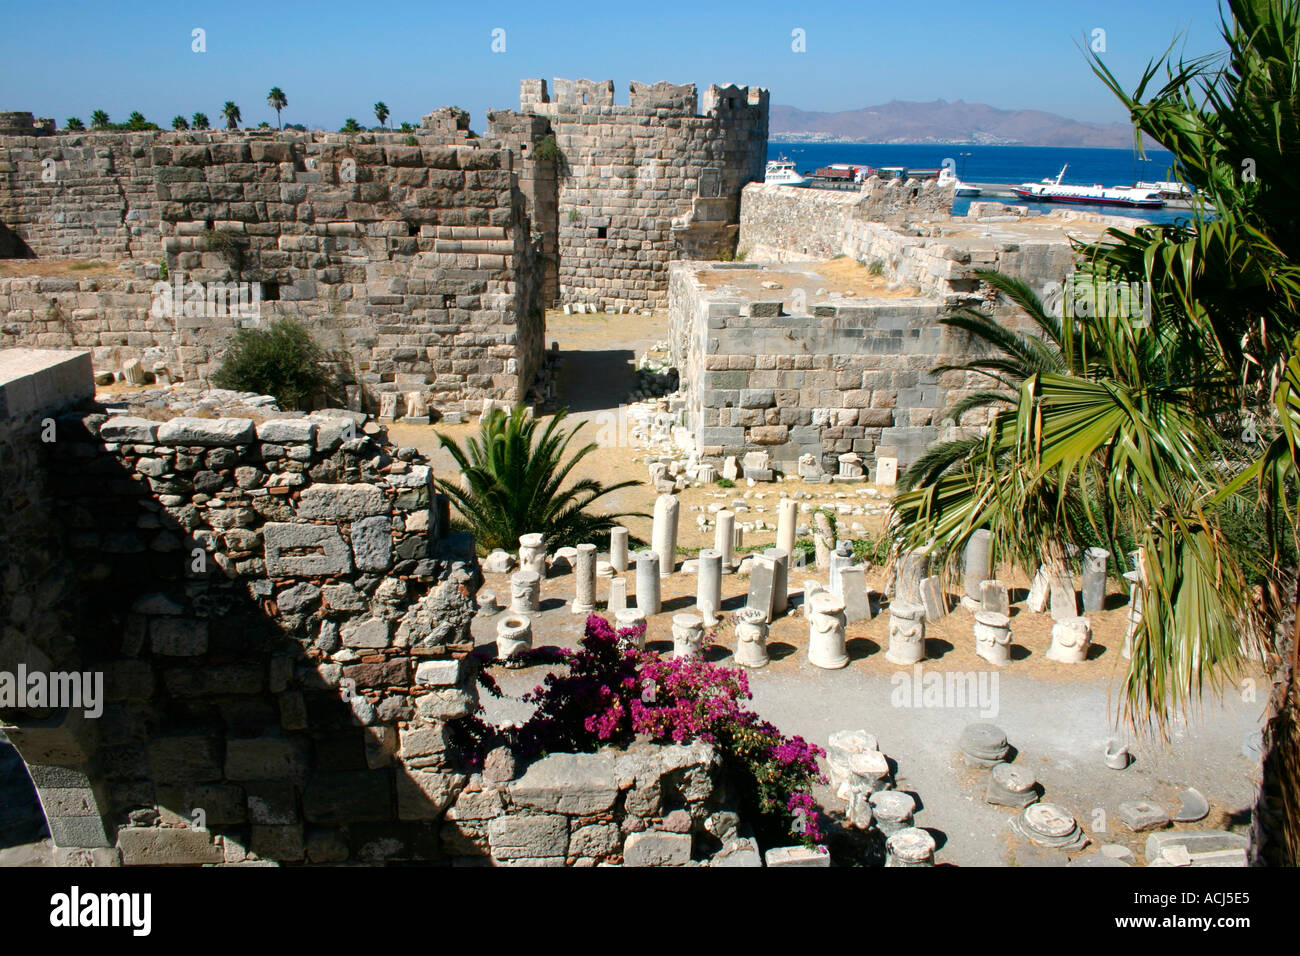 The Castle in Kos town on the Greek island of Kos. Stock Photo